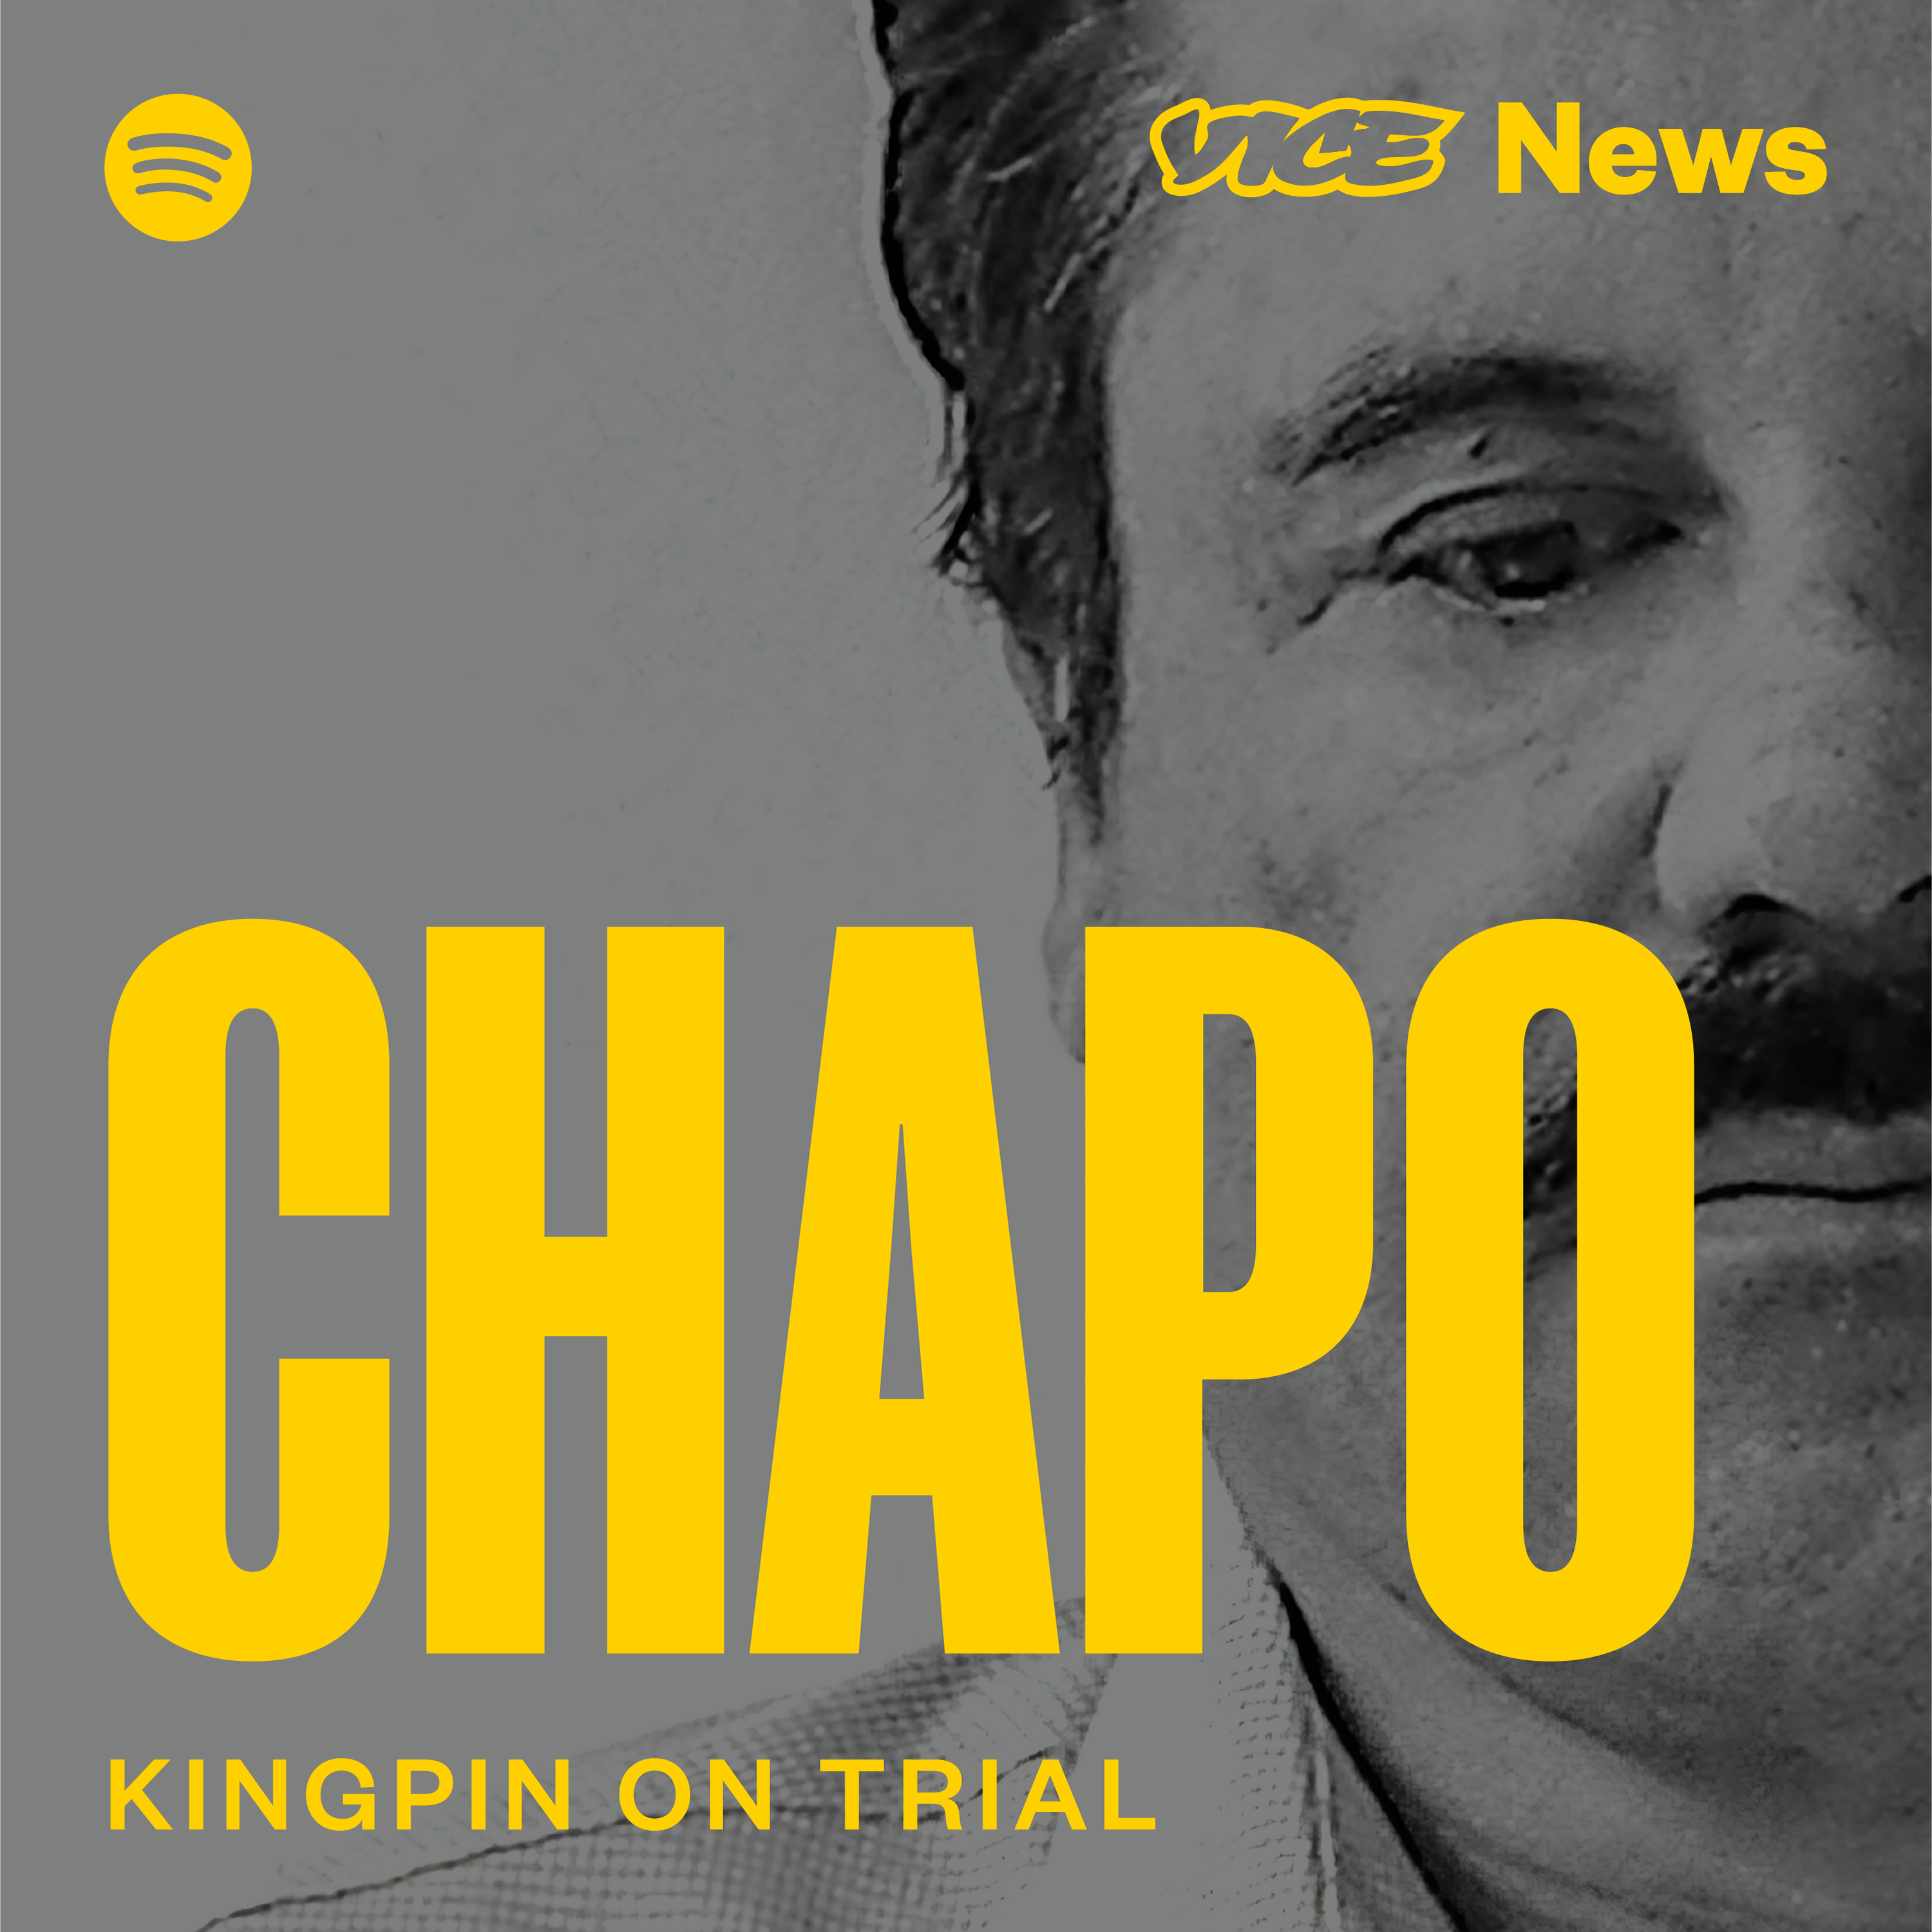 Introducing ”Chapo,” a New Podcast From VICE News